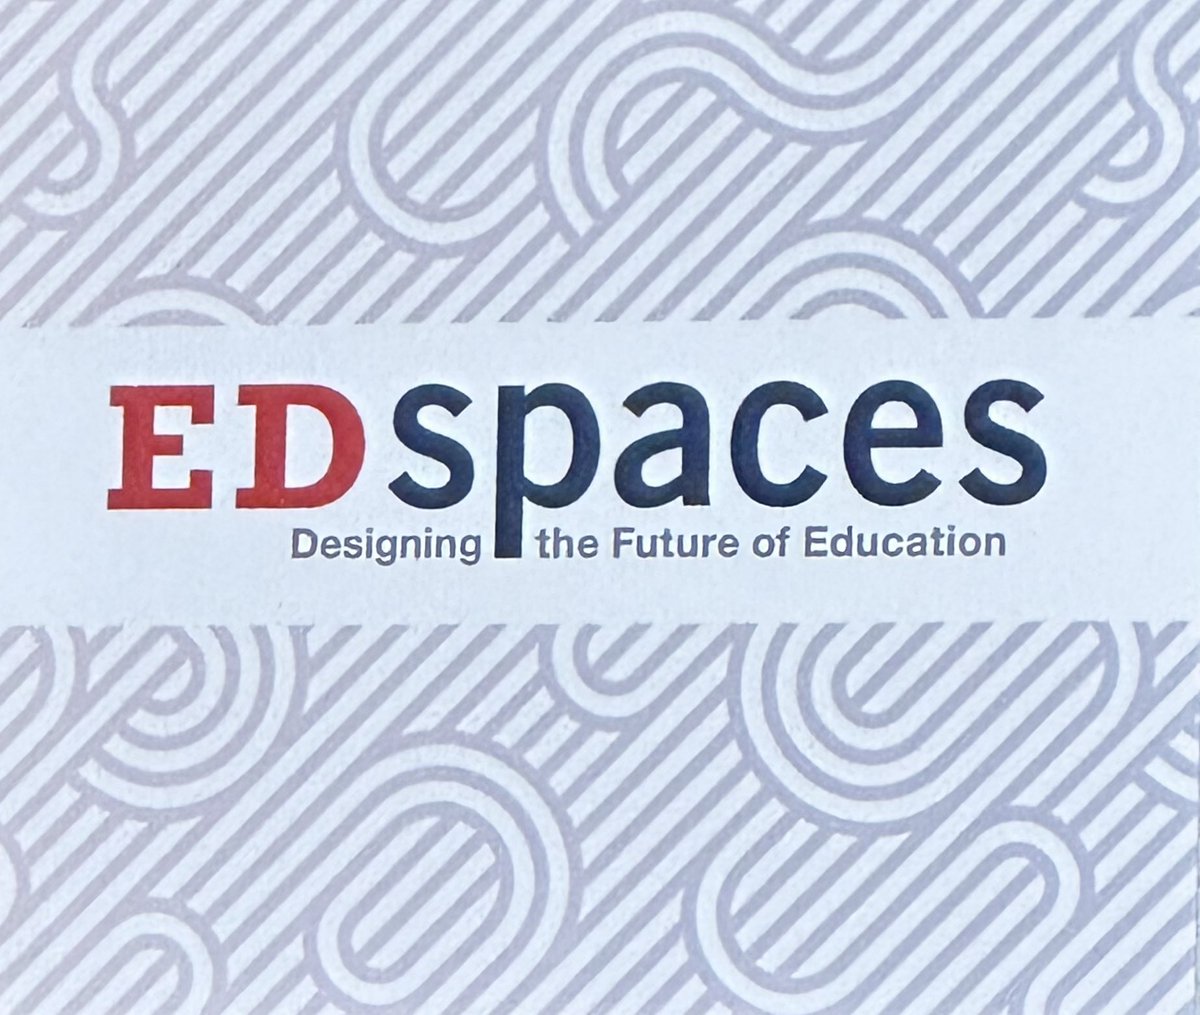 Excited to be learning at @EDspacesEvent with incredibly creative designers and industry leaders. @EDmarketassn